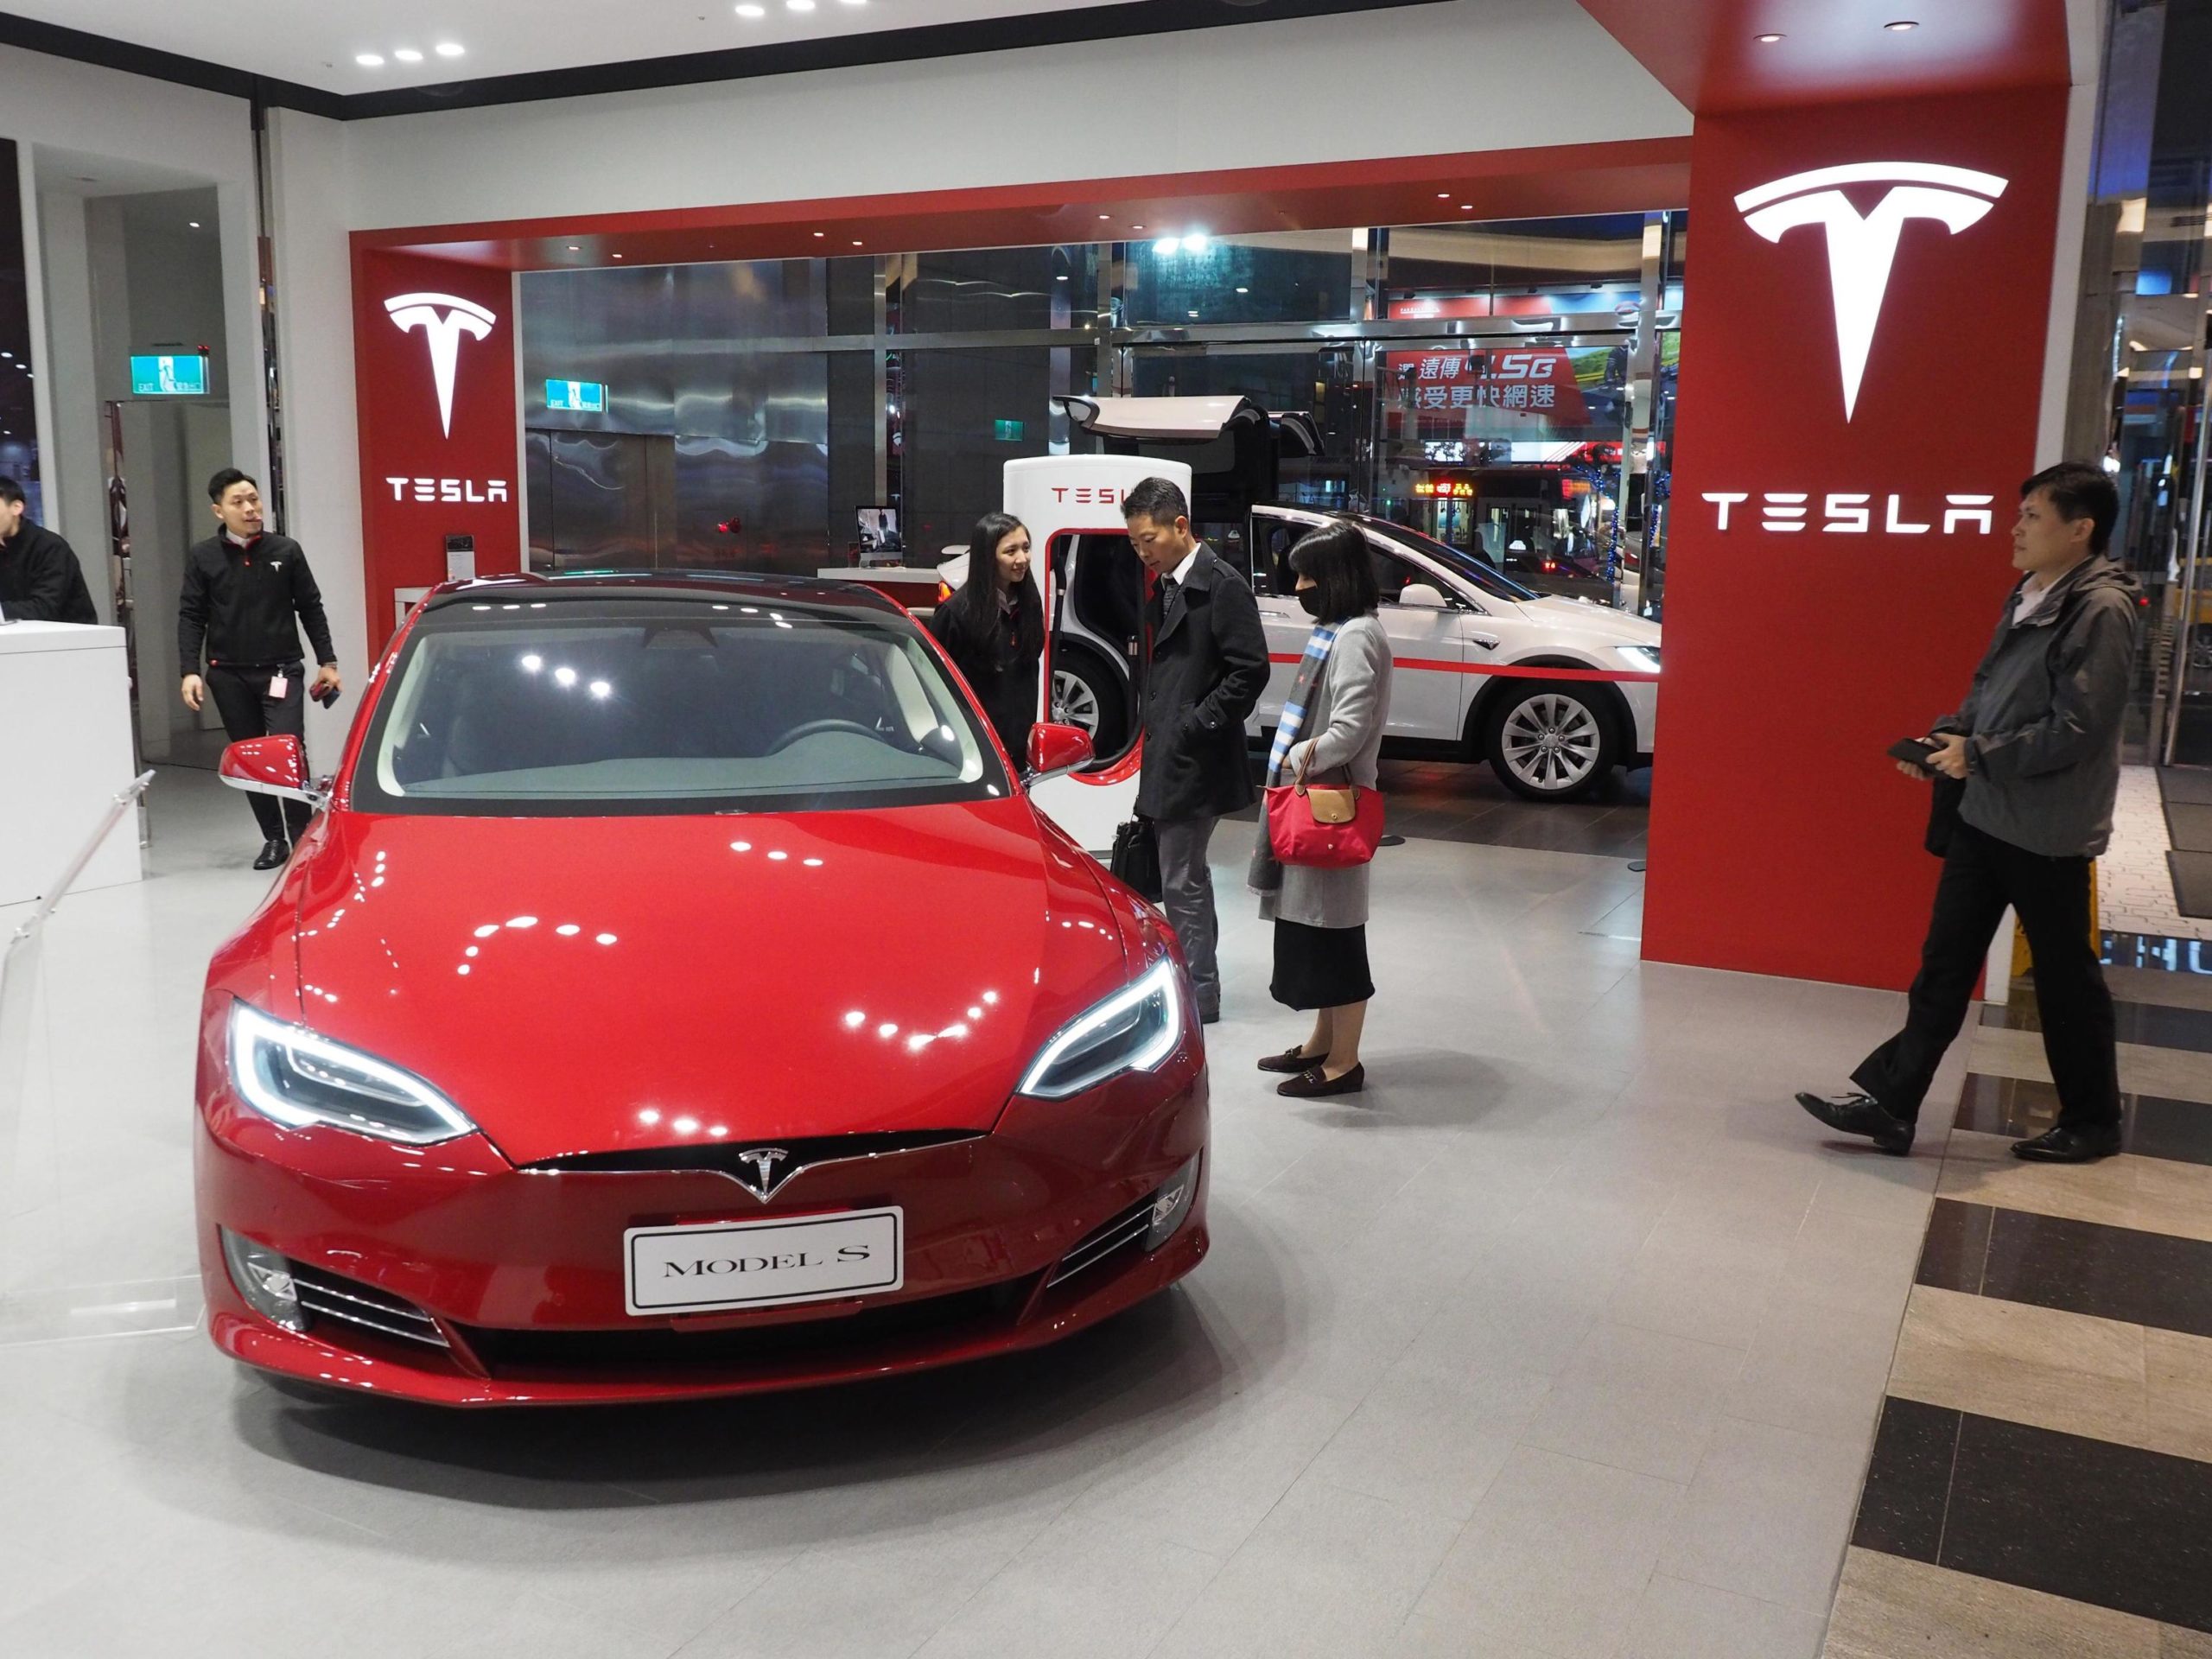 epa07228829 People look at a Tesla Model S electric car in a Tesla Store in Taipei, Taiwan, 13 December 2018. On 12 December, a Tesla Model S 2017 100D crashed into two parked police cars on a Taiwan highway in the first accident involving a Tesla operating on autopilot in Taiwan. All three cars were damaged but no one was injured as the two policemen were outside their cars handling a road accident. The driver said he had switched to autopilot mode and dozed off when the car crashed. Tesla Taiwan said it is investigation the crash. Taiwan Highway Police Bureau warned that Taiwan does not allow drivers using full autopliot yet, and that when a car runs on semi-autopilot, the driver must keep his or her hands on the wheel all the time so that the driver can take control of the car when something happens on the road.  EPA/DAVID CHANG